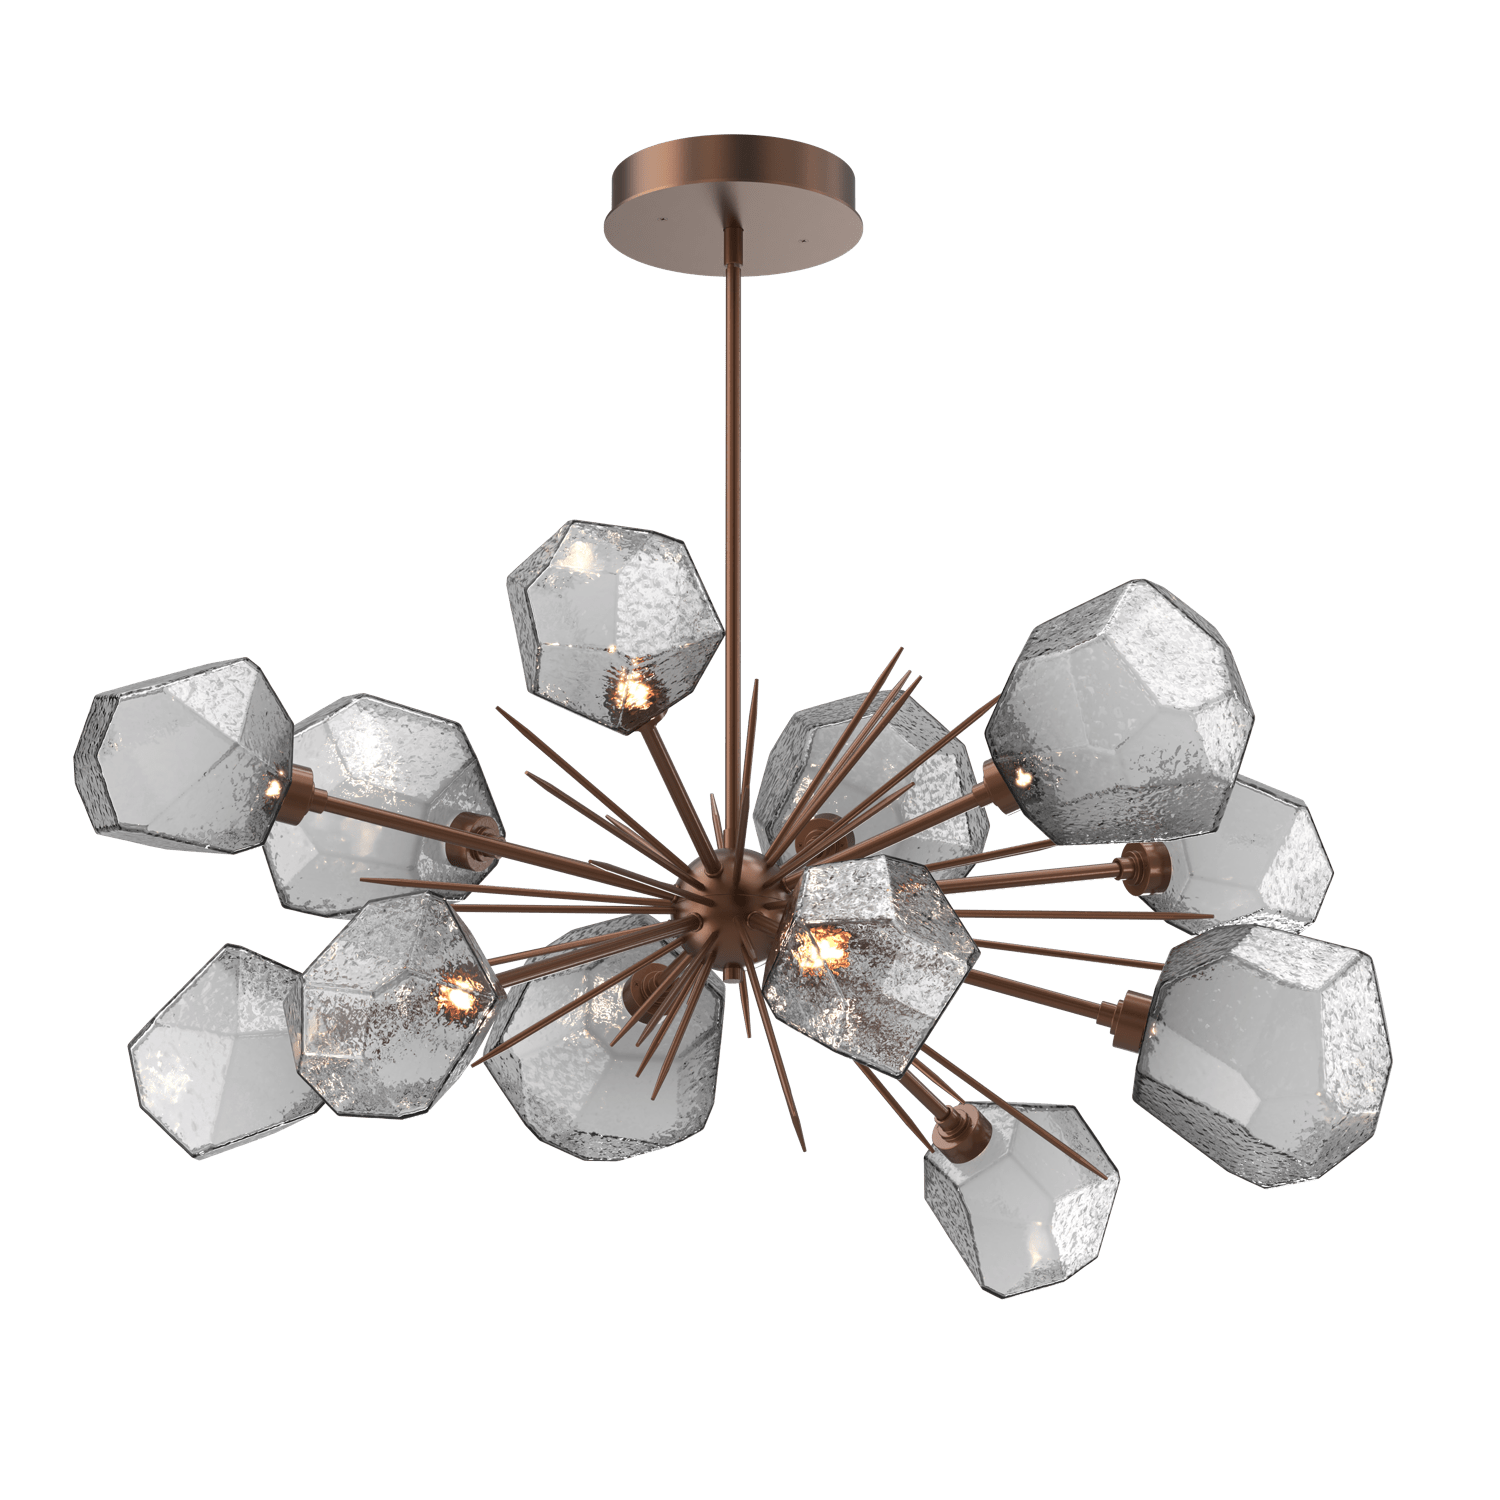 PLB0039-0D-BB-S-Hammerton-Studio-Gem-43-inch-oval-starburst-chandelier-with-burnished-bronze-finish-and-smoke-blown-glass-shades-and-LED-lamping